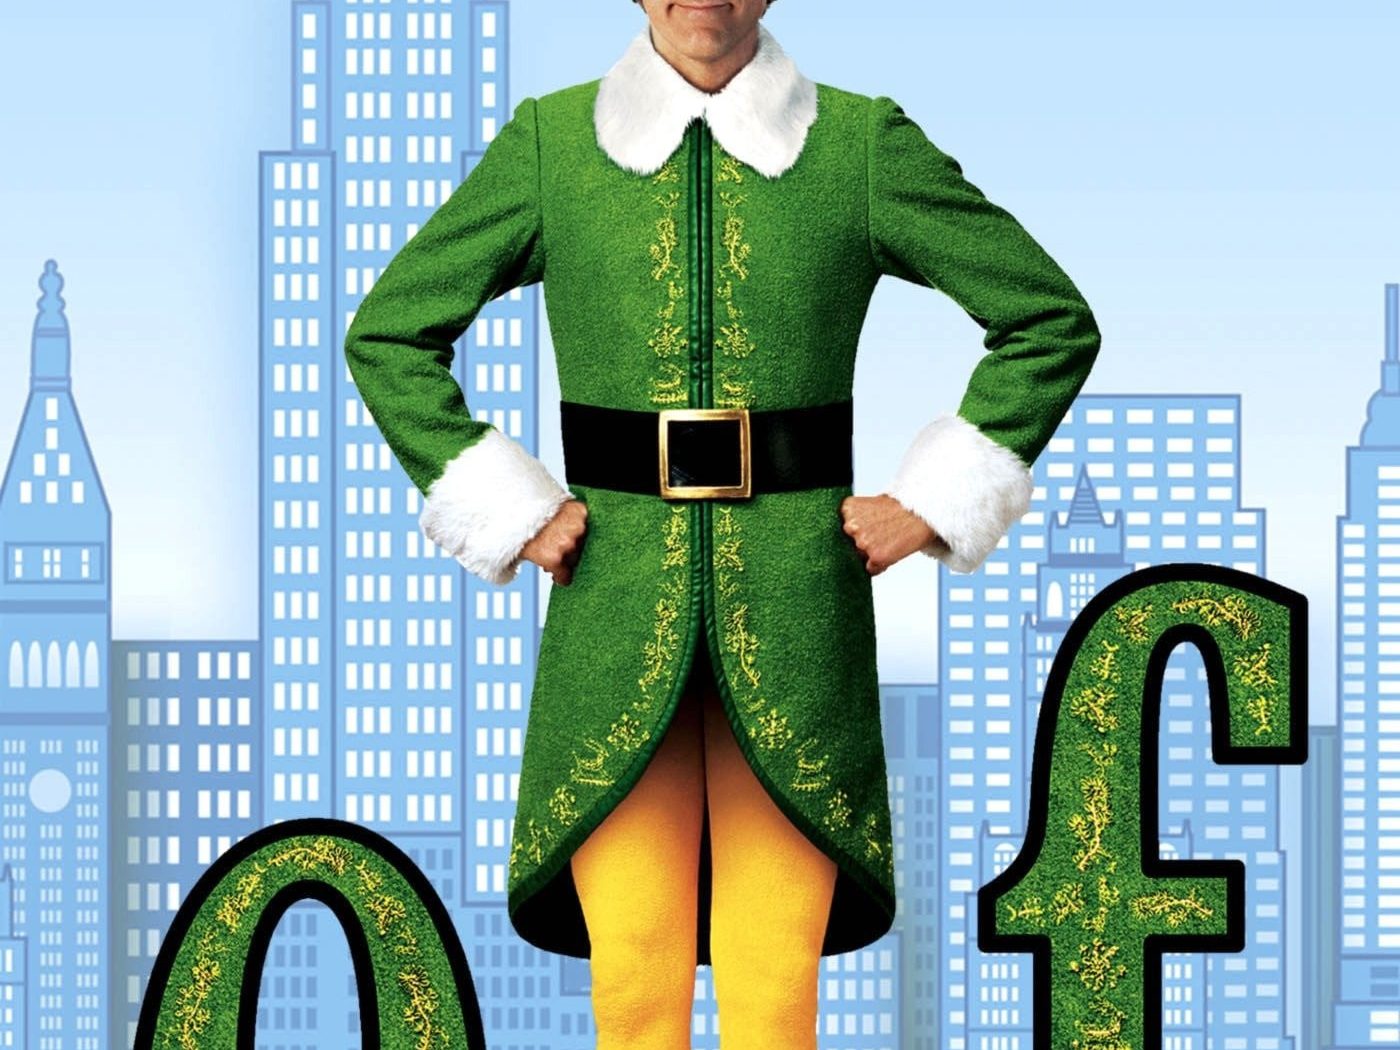 Poster for the movie "Elf"